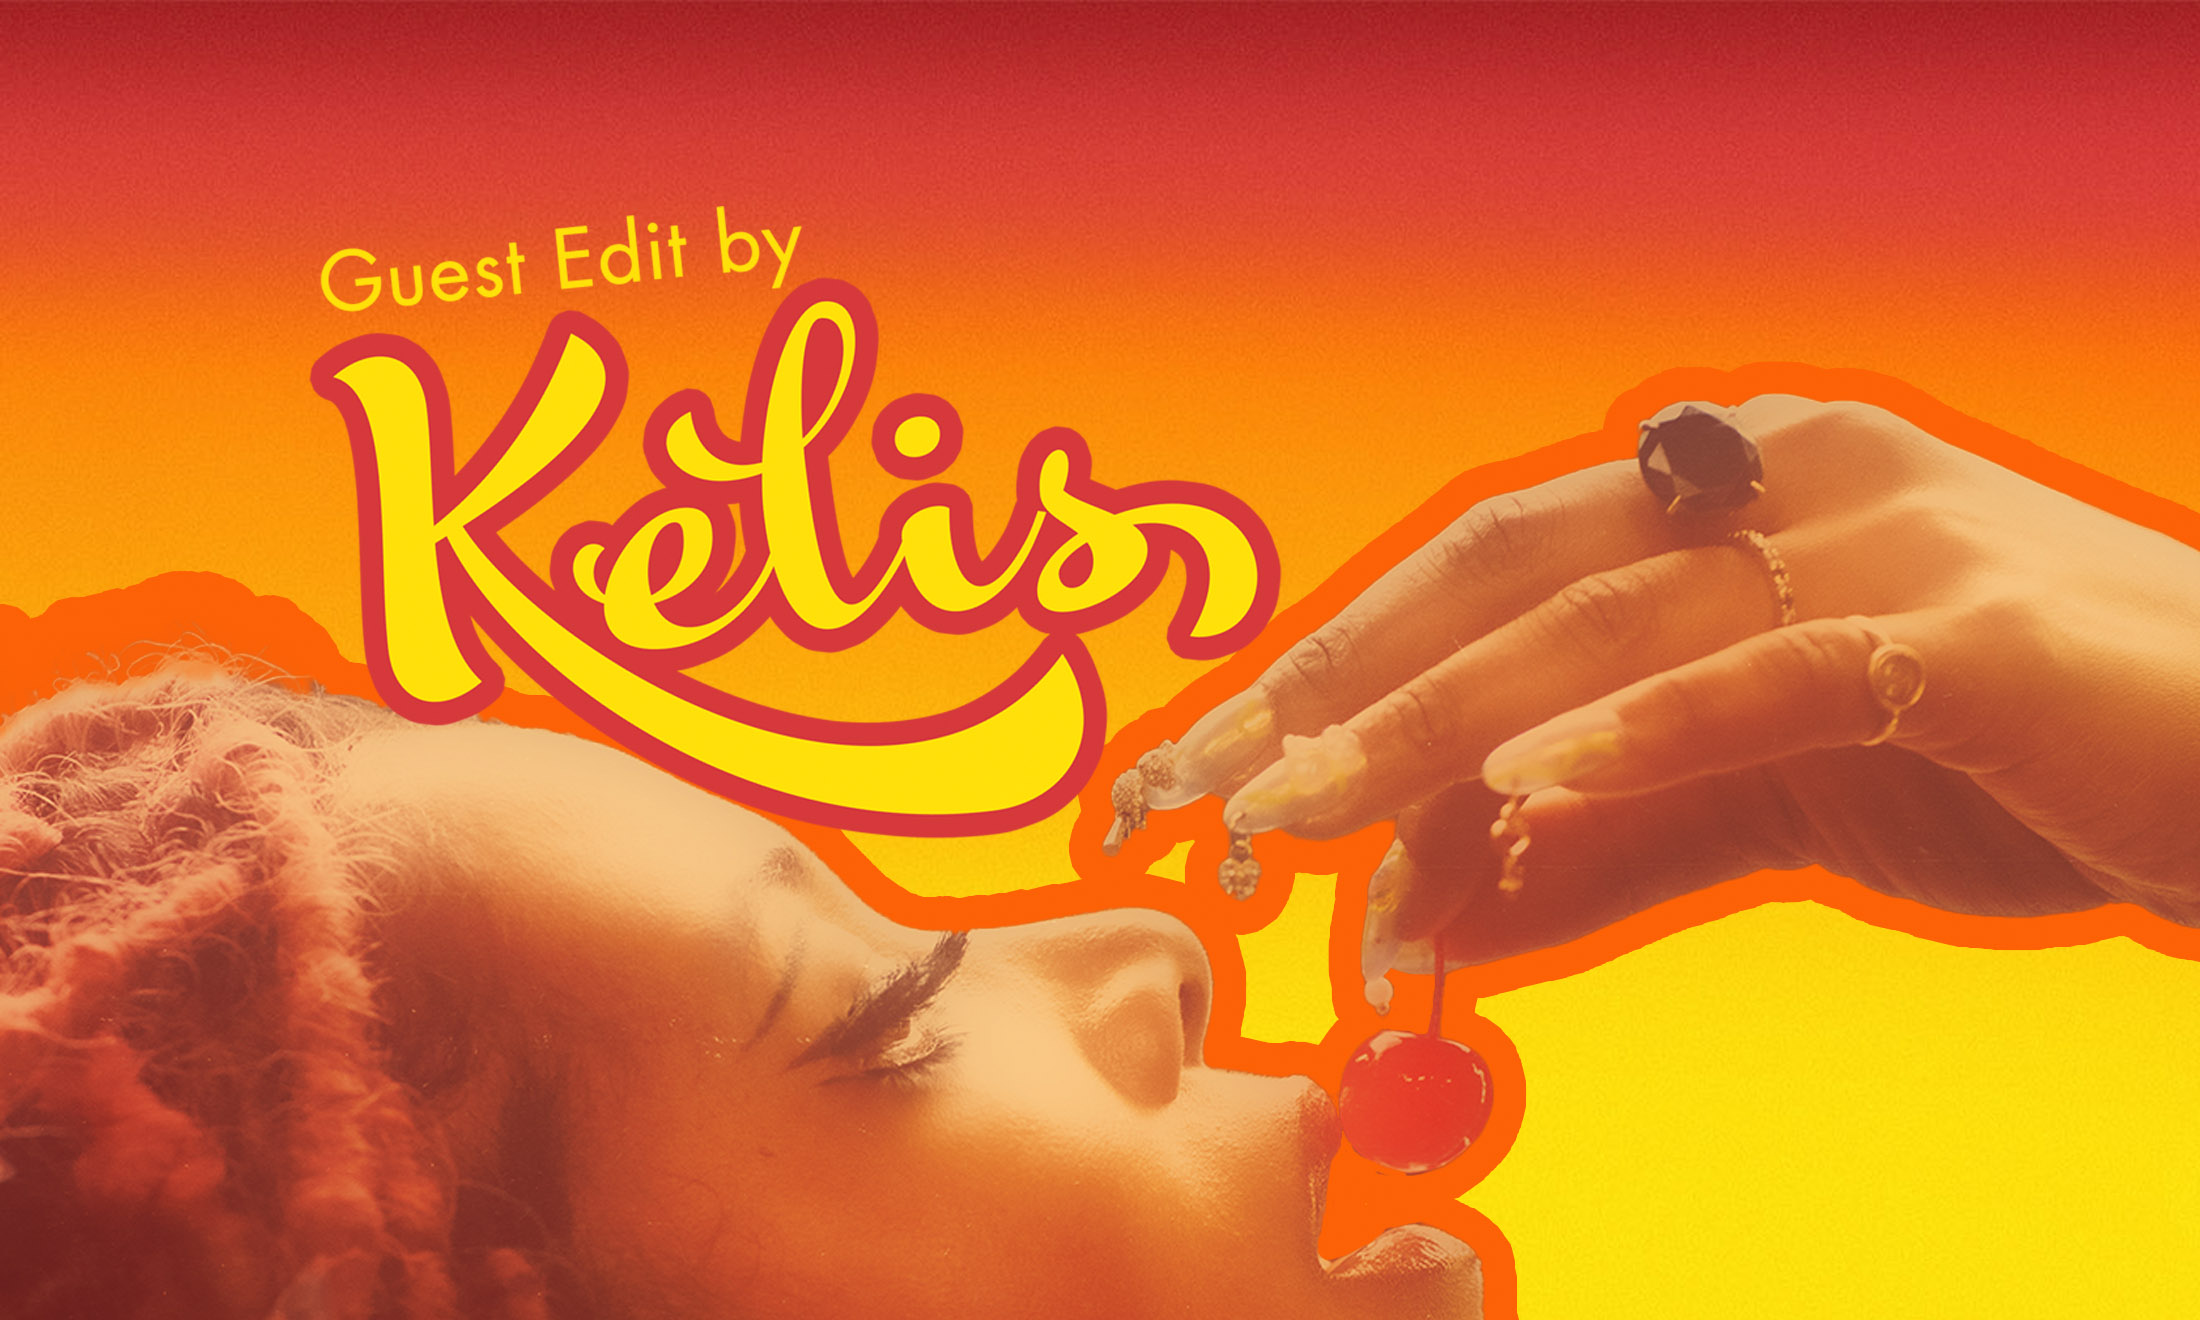 Welcome to the Kelis guest edit